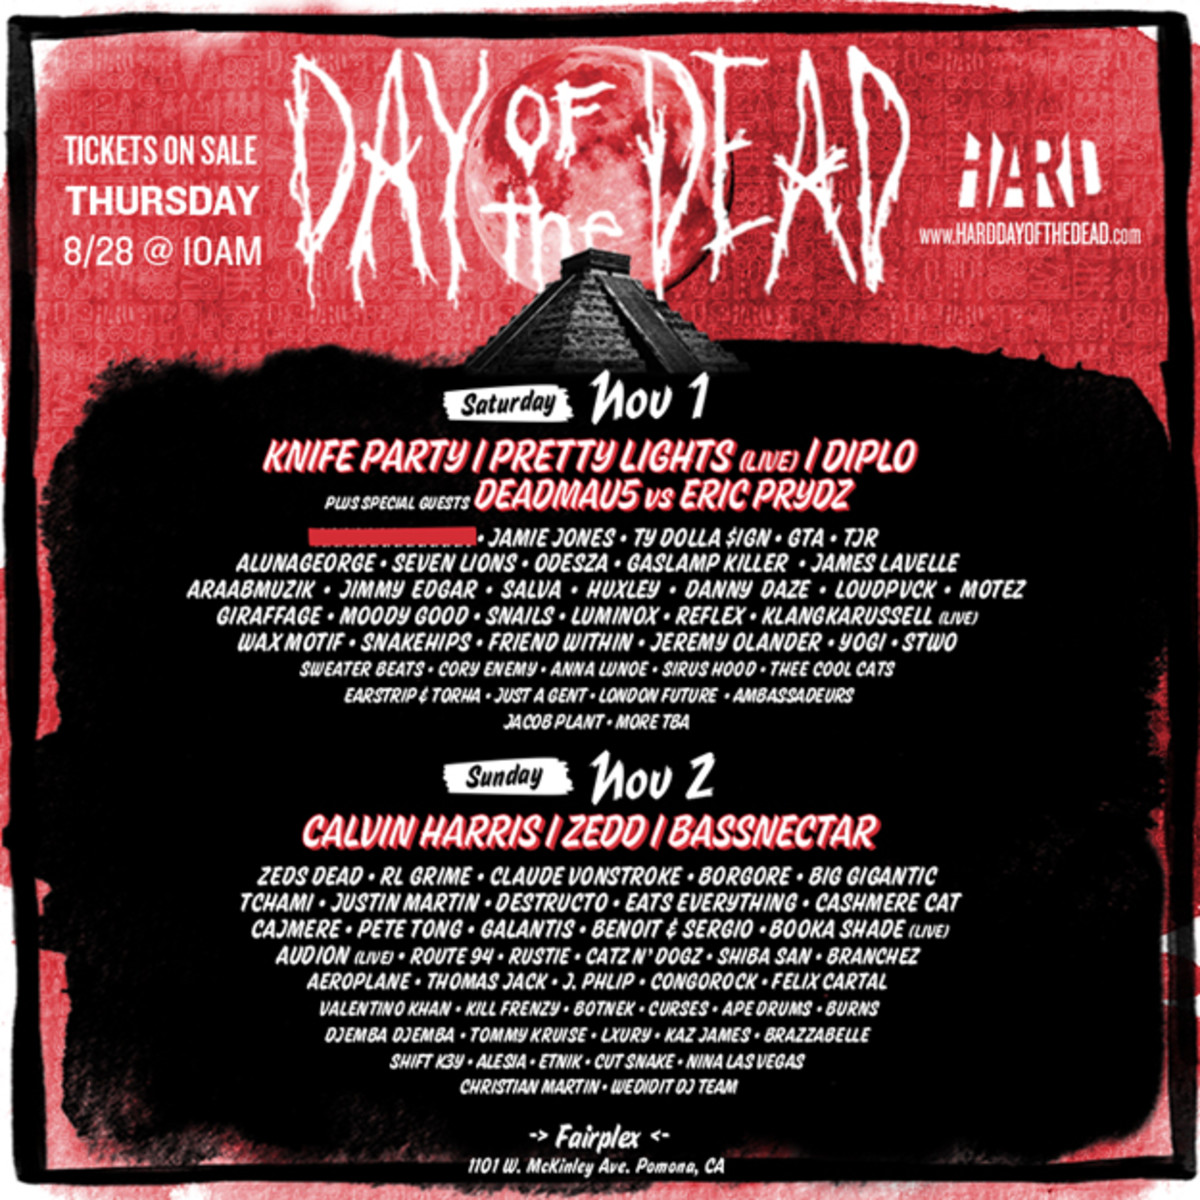 Here is the HARD Day of the Dead 2014 Lineup Complex